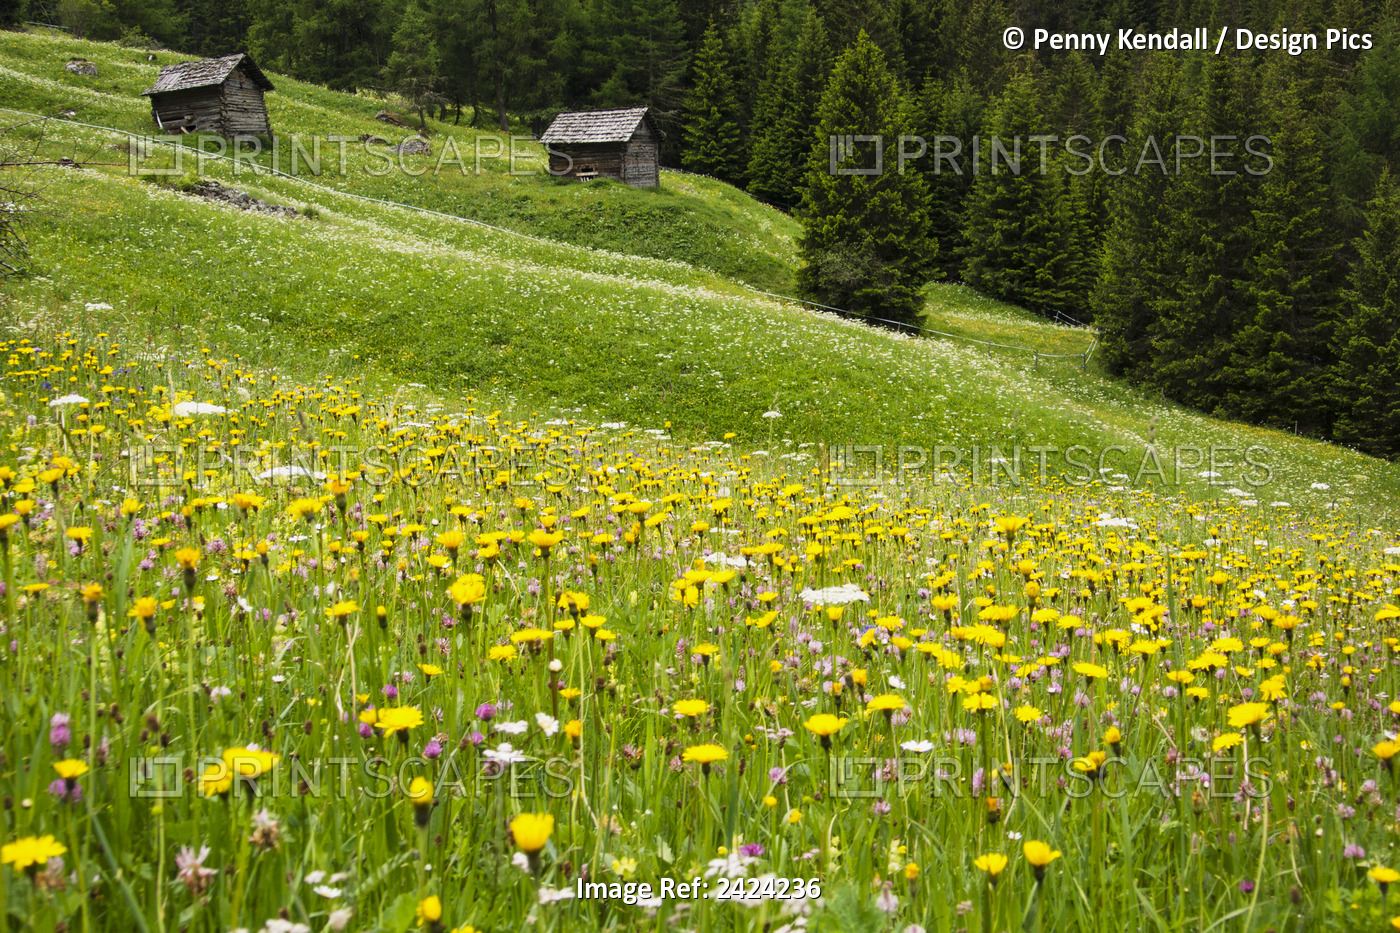 Summer Flower Meadows With Alpine Chalets And Barns; Zinal, Switzerland